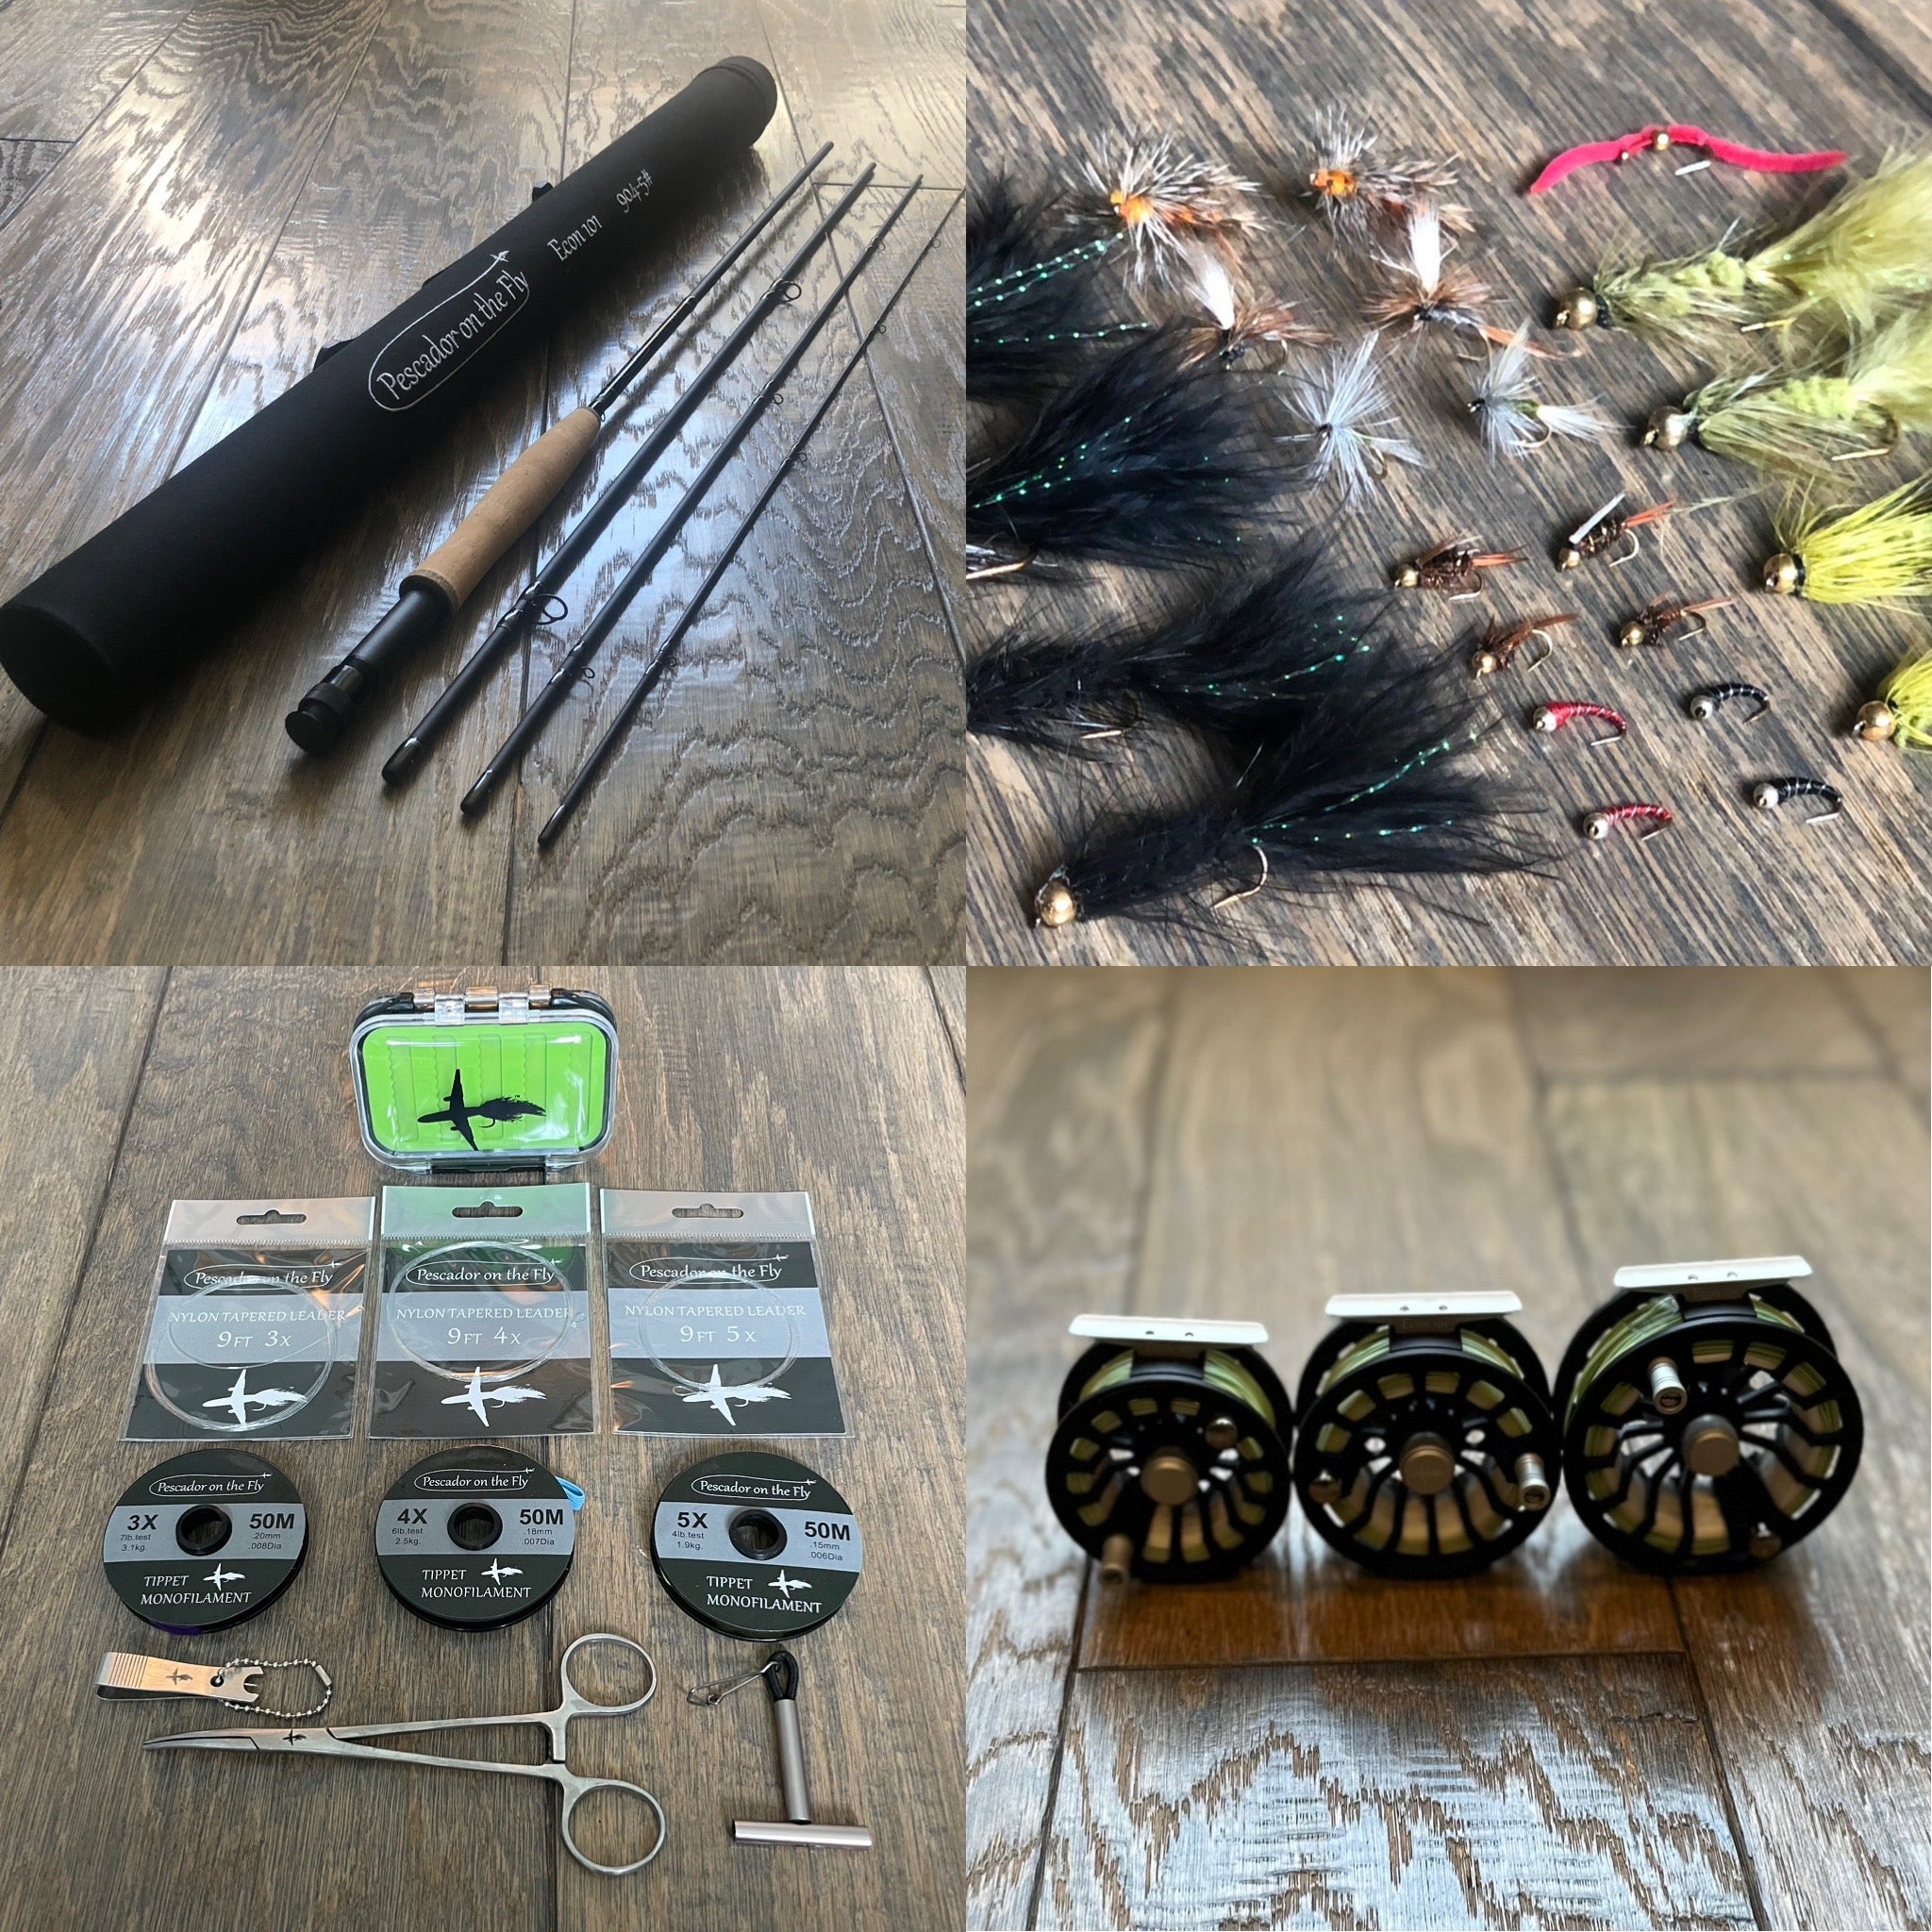 ECON 101 Fly Fishing Starter Combo Package | 904-4 | 9' Four Section 4 Weight Fly Rod And Reel Beginner Outfit